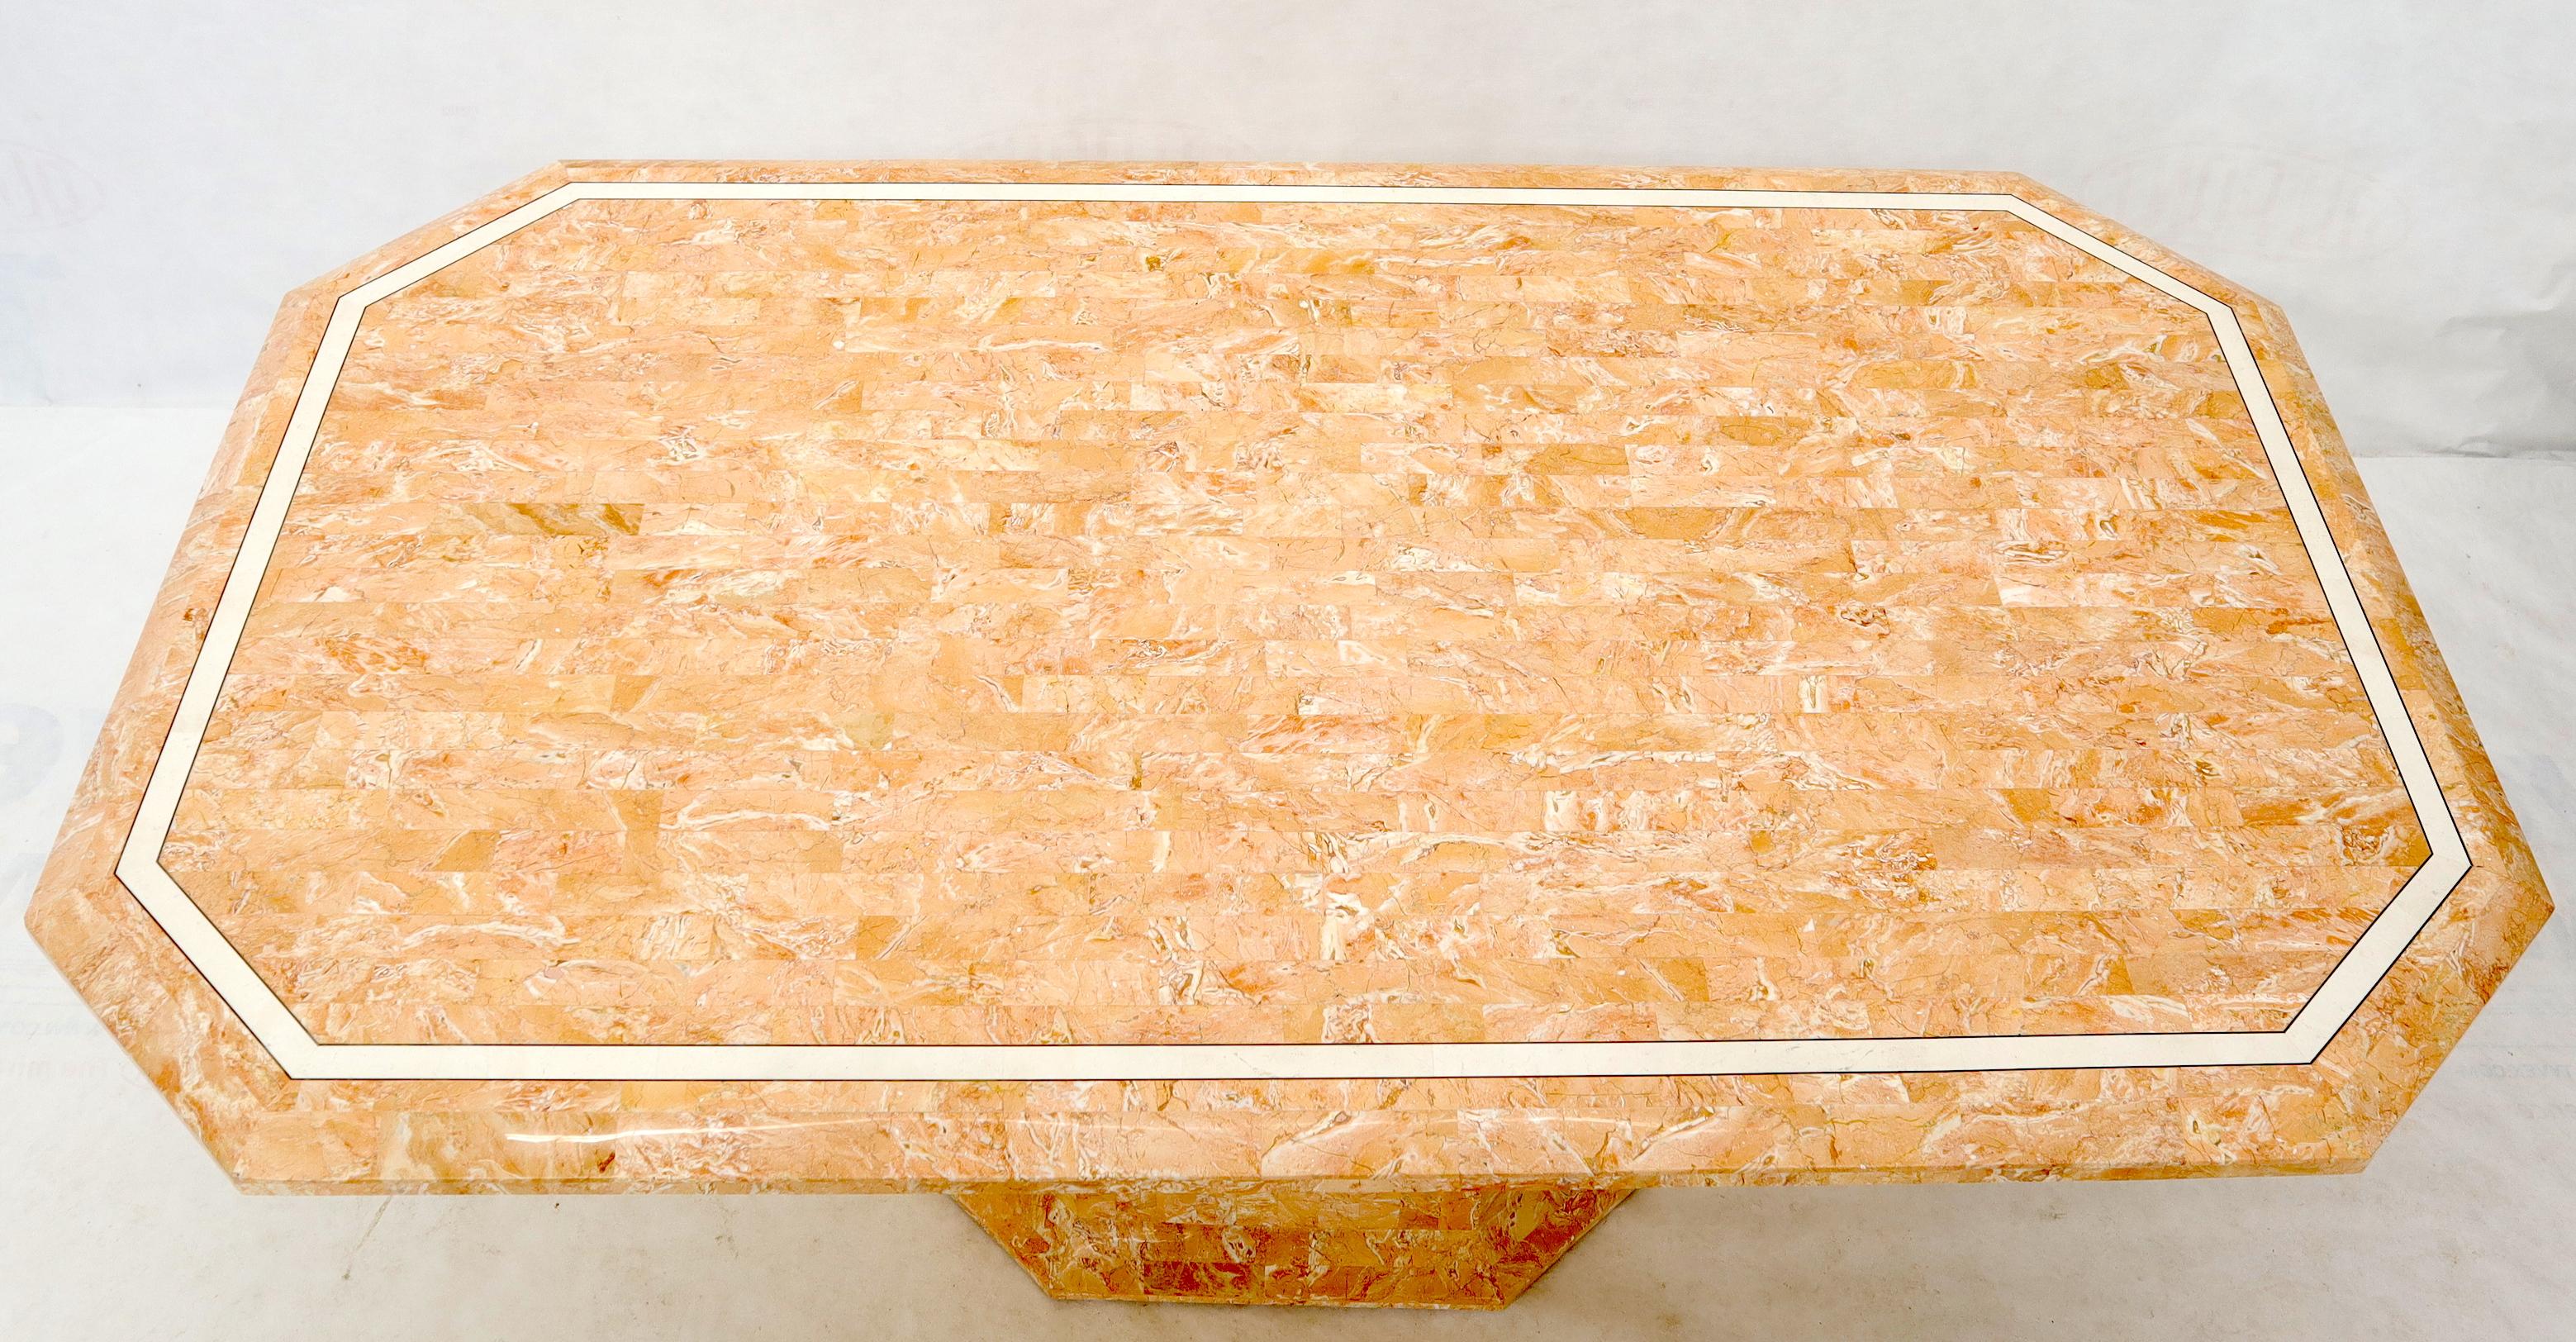 Tessellated Red & White Marble Tile Single Pedestal Rectangular Dining Table In Excellent Condition For Sale In Rockaway, NJ